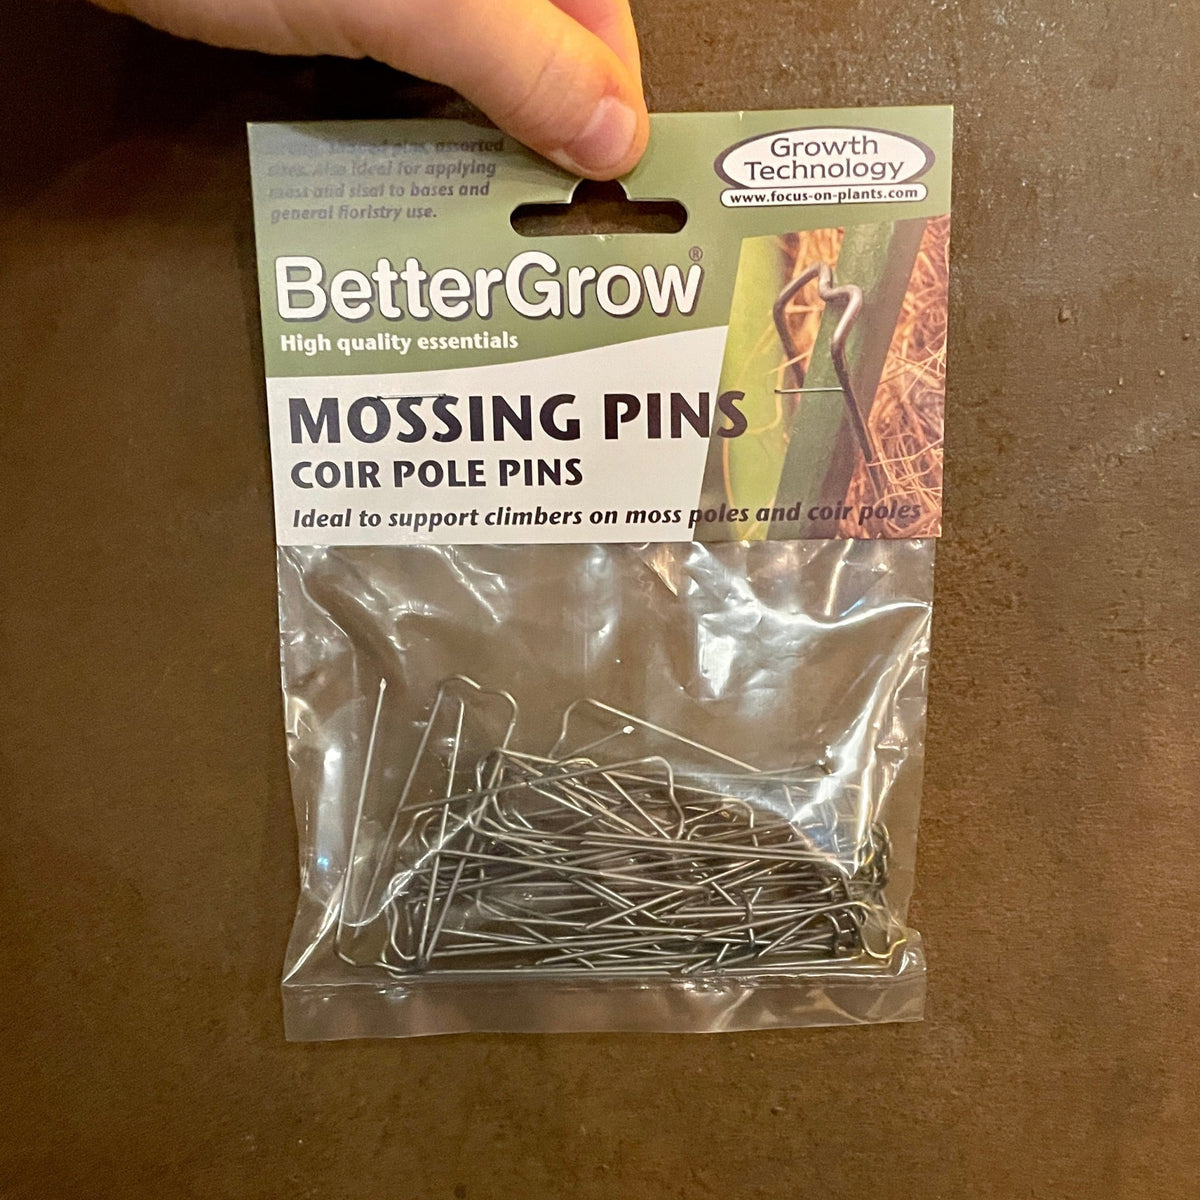 How to Correctly Use Mossing Pins